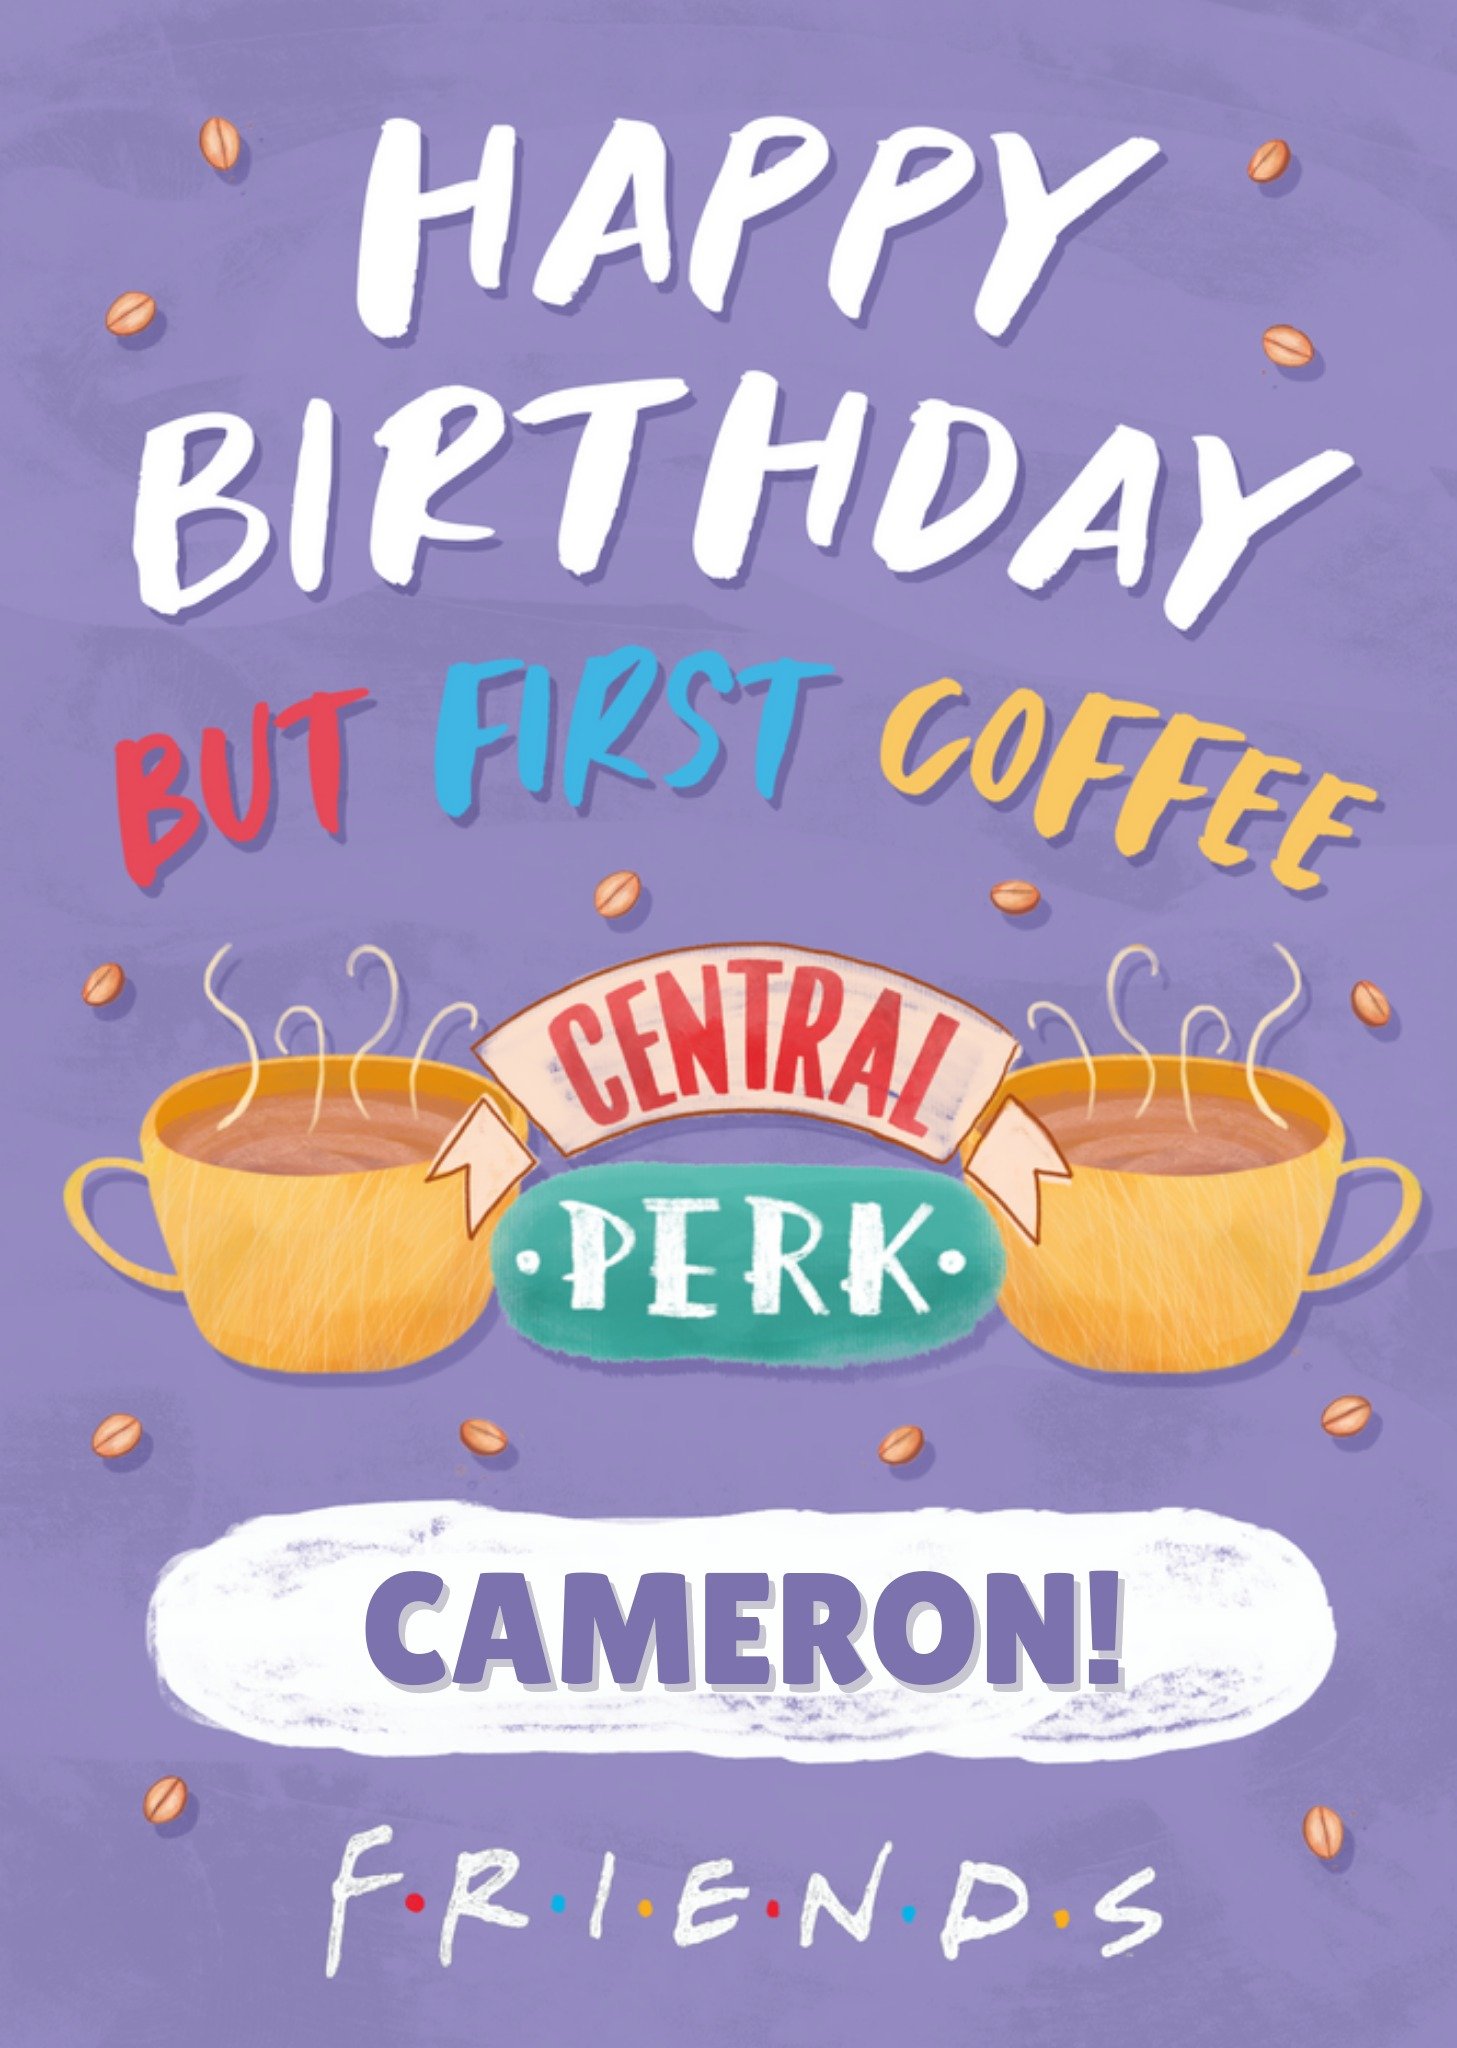 Friends (Tv Show) Friends Central Perk Birthday Card, Large